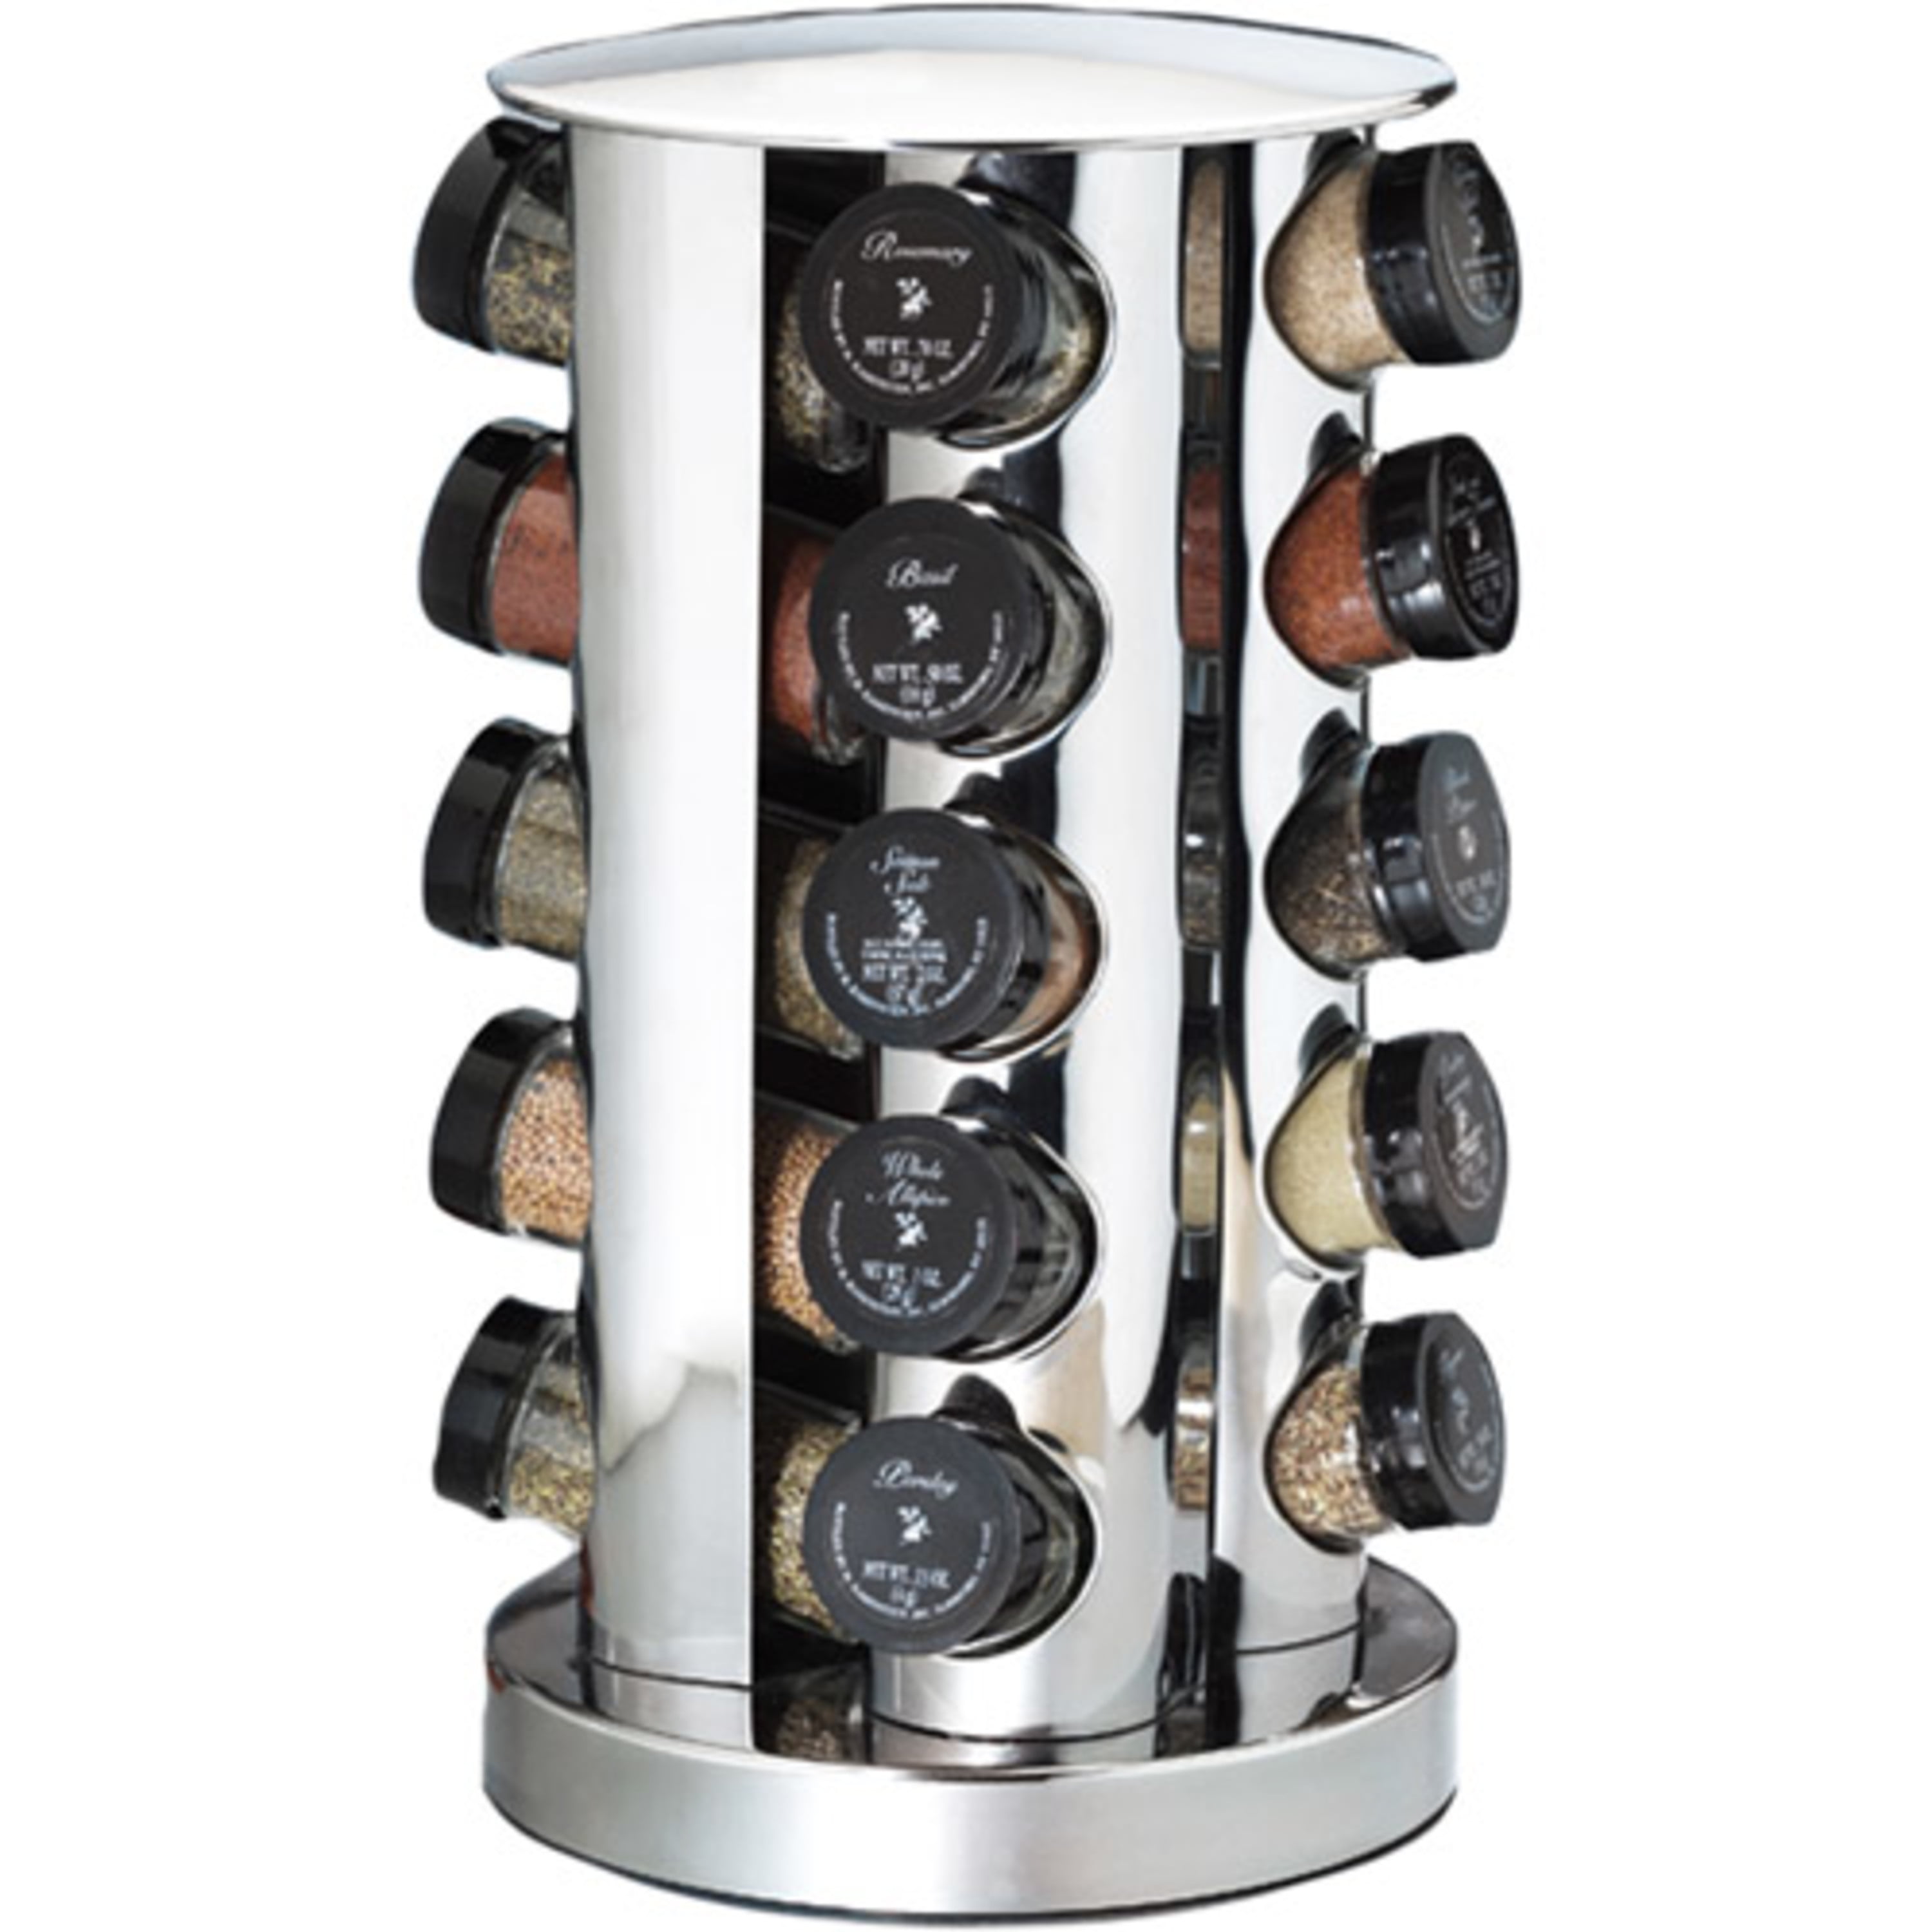 Tytroy Space Saving & Easy Access 14 Tall Round Revolving 20 Empty Glass Jars Kitchen Countertop Stainless Steel Spice Rack Tower Stand Organizer